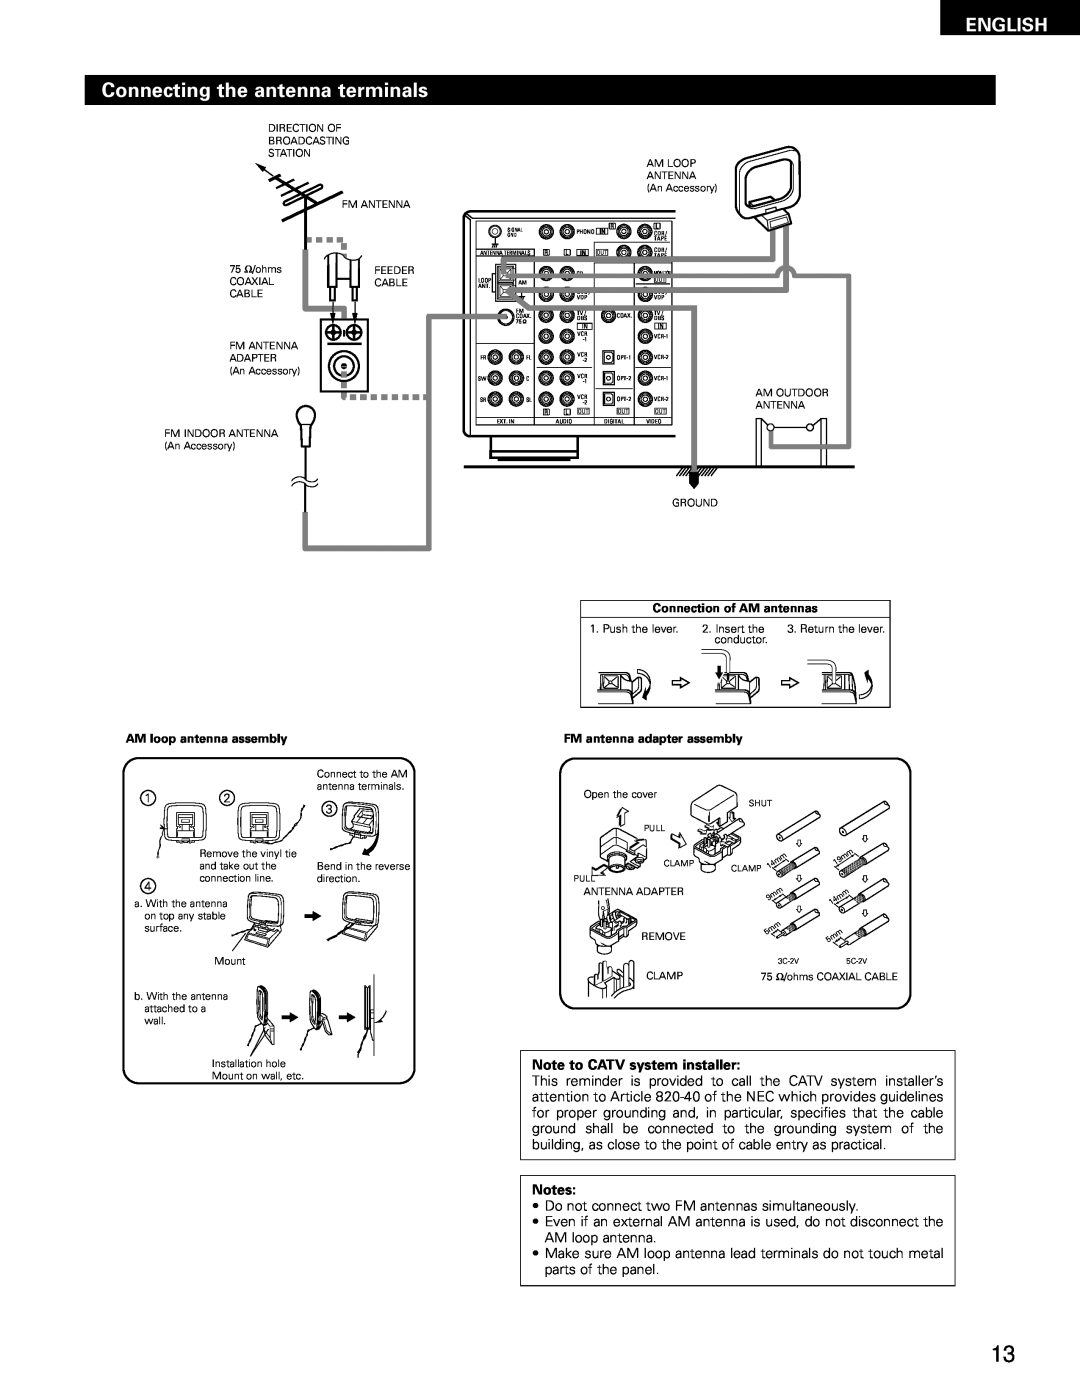 Denon AVR-1802/882 manual Connecting the antenna terminals, English, Note to CATV system installer 